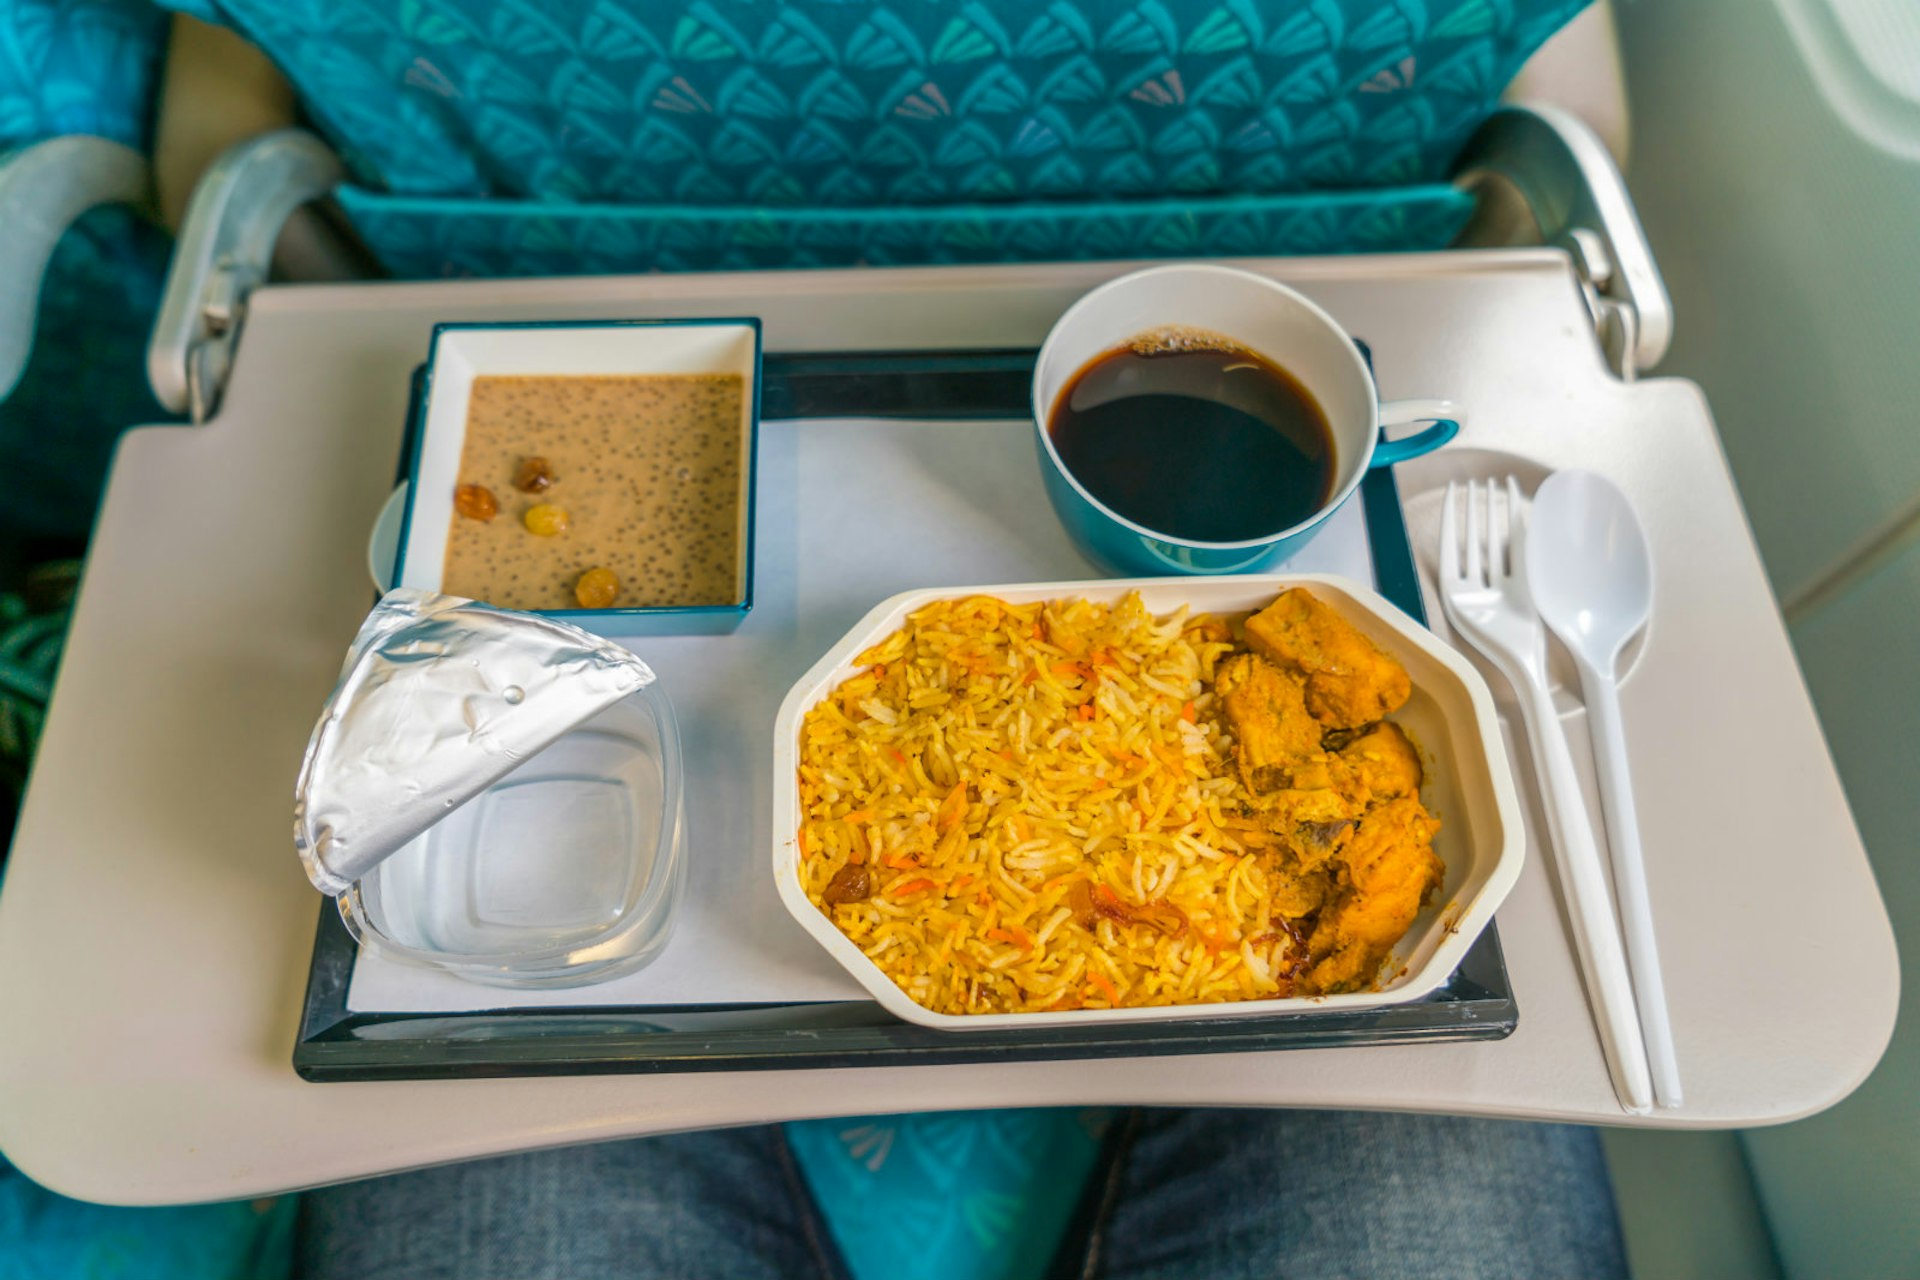 Travel predictions for 2018 - An in-flight meal on a tray © jannoon028 / Shutterstock